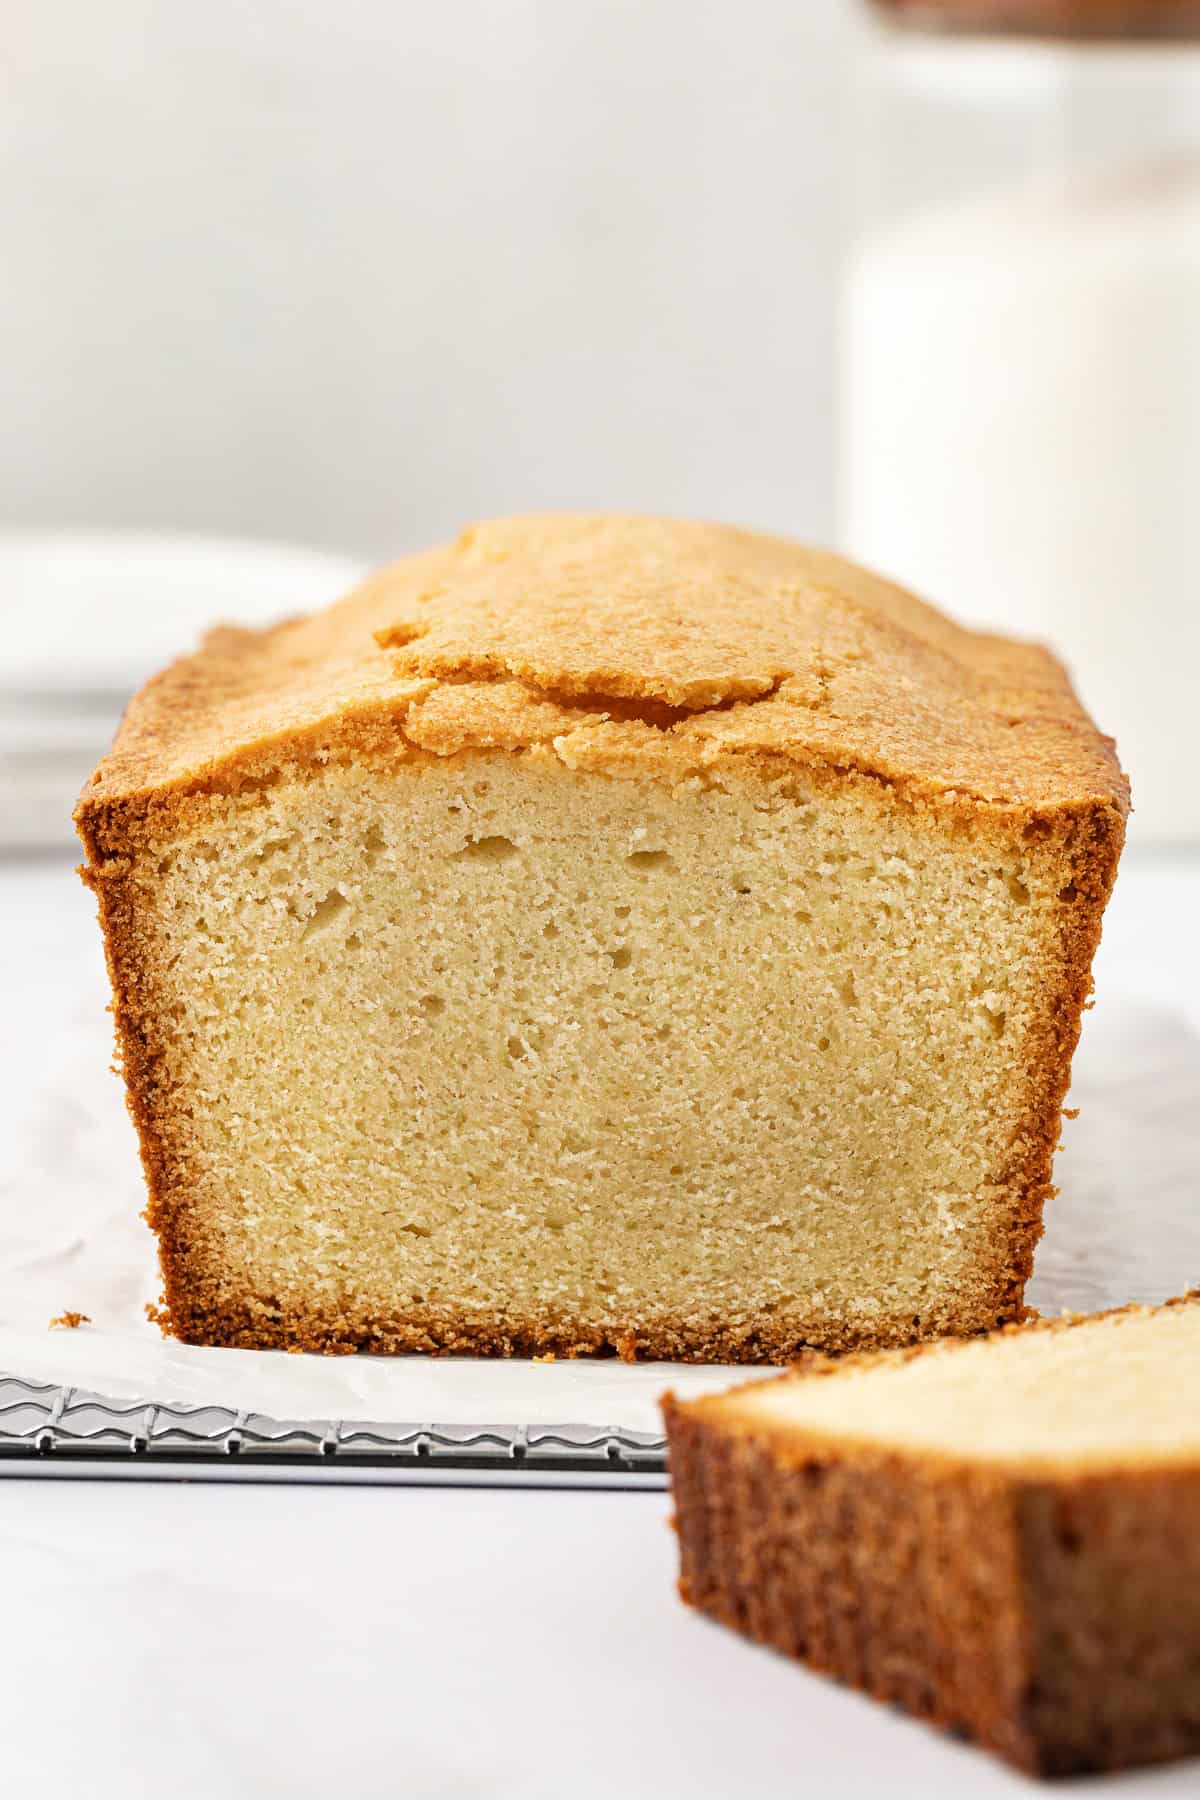 a pound cake on parchment paper on a wire rack with one slice cut sitting beside the cake, exposing the light yellow inside with a golden brown edge